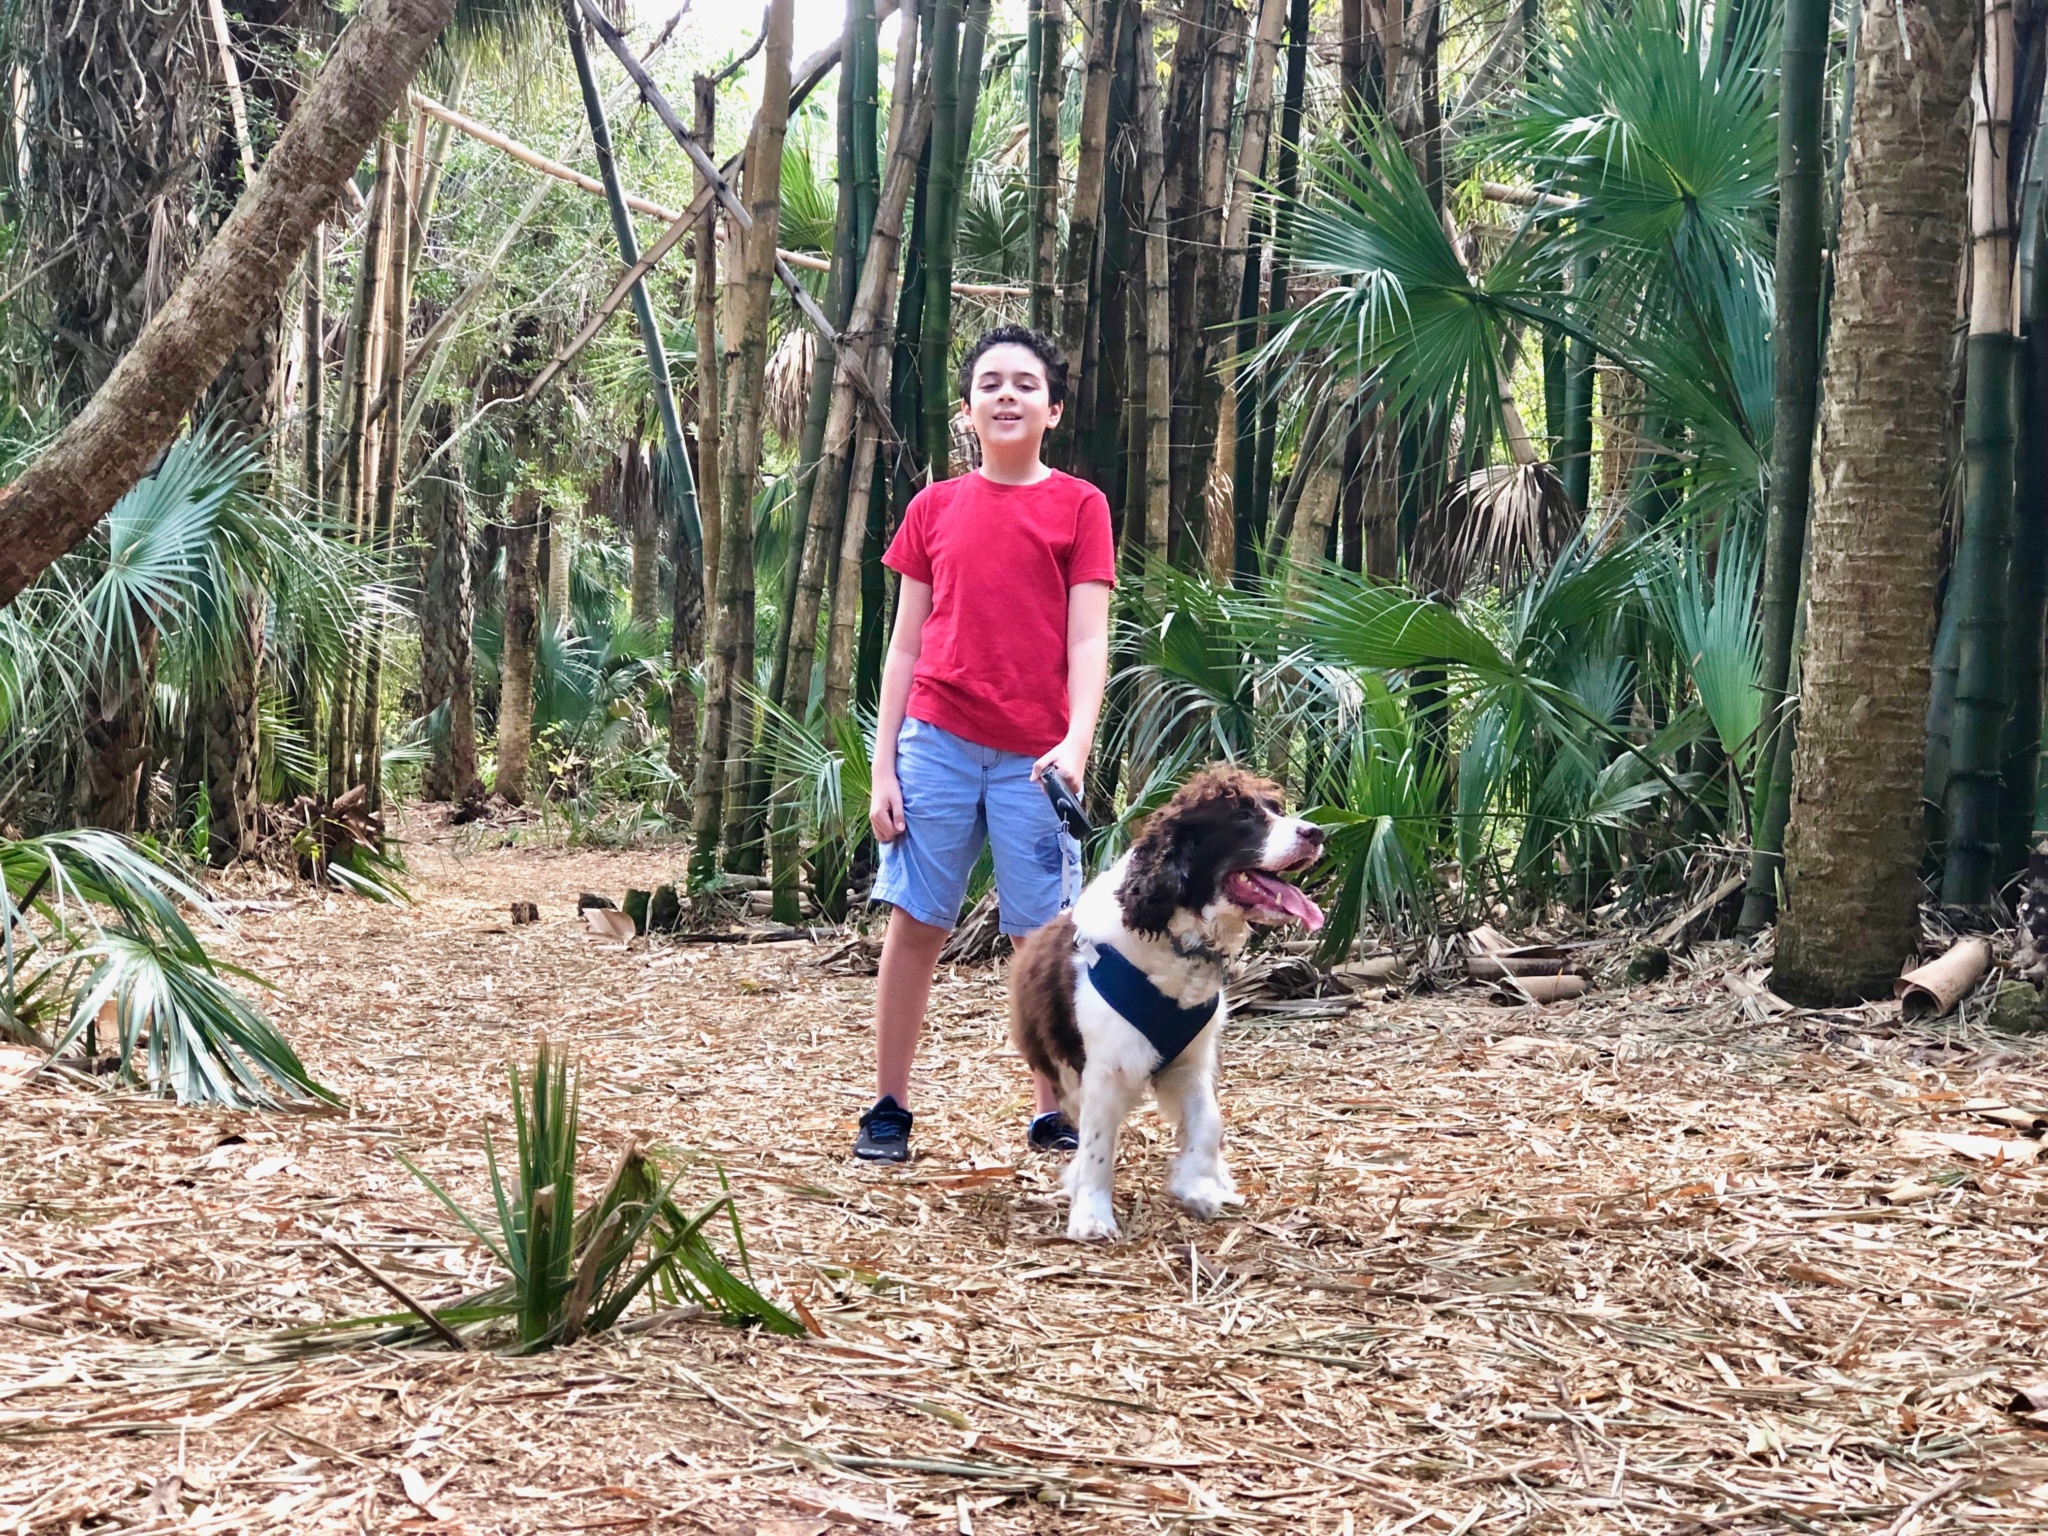 5 Tips for Hiking with Your Dog